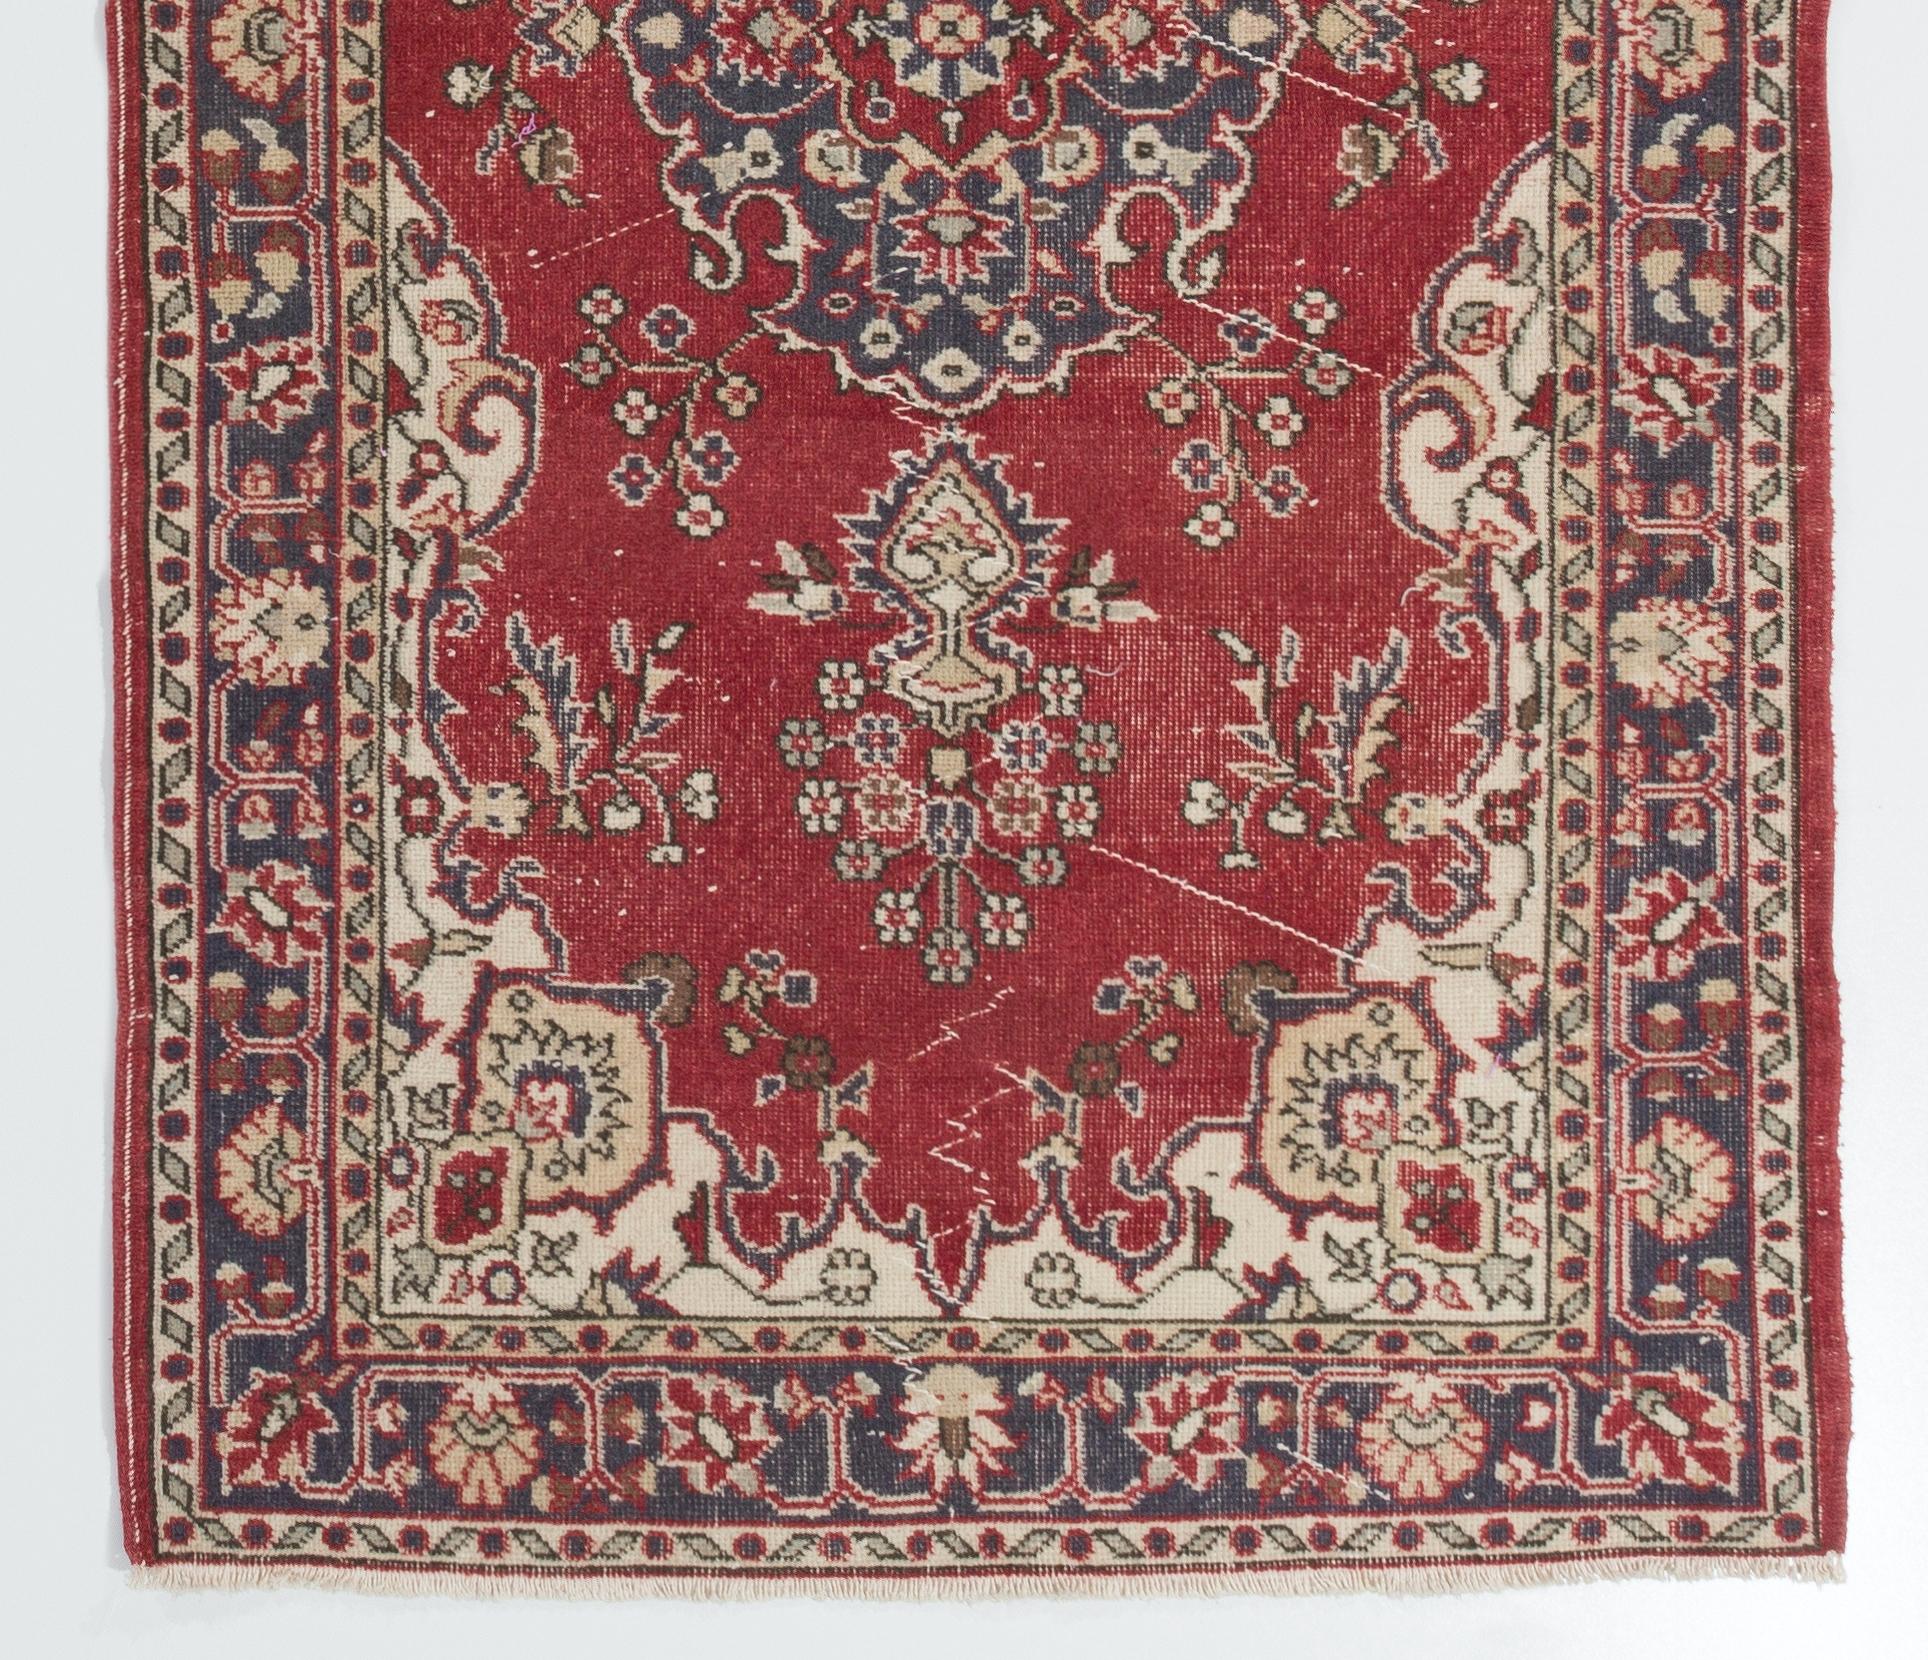 This vintage hand knotted Turkish area rug was originally made in the 1960s. It features a central medallion in faded navy blue, flanked on either side by two vases holding bouquets of dainty blossoms in a carmine red field decorated with more